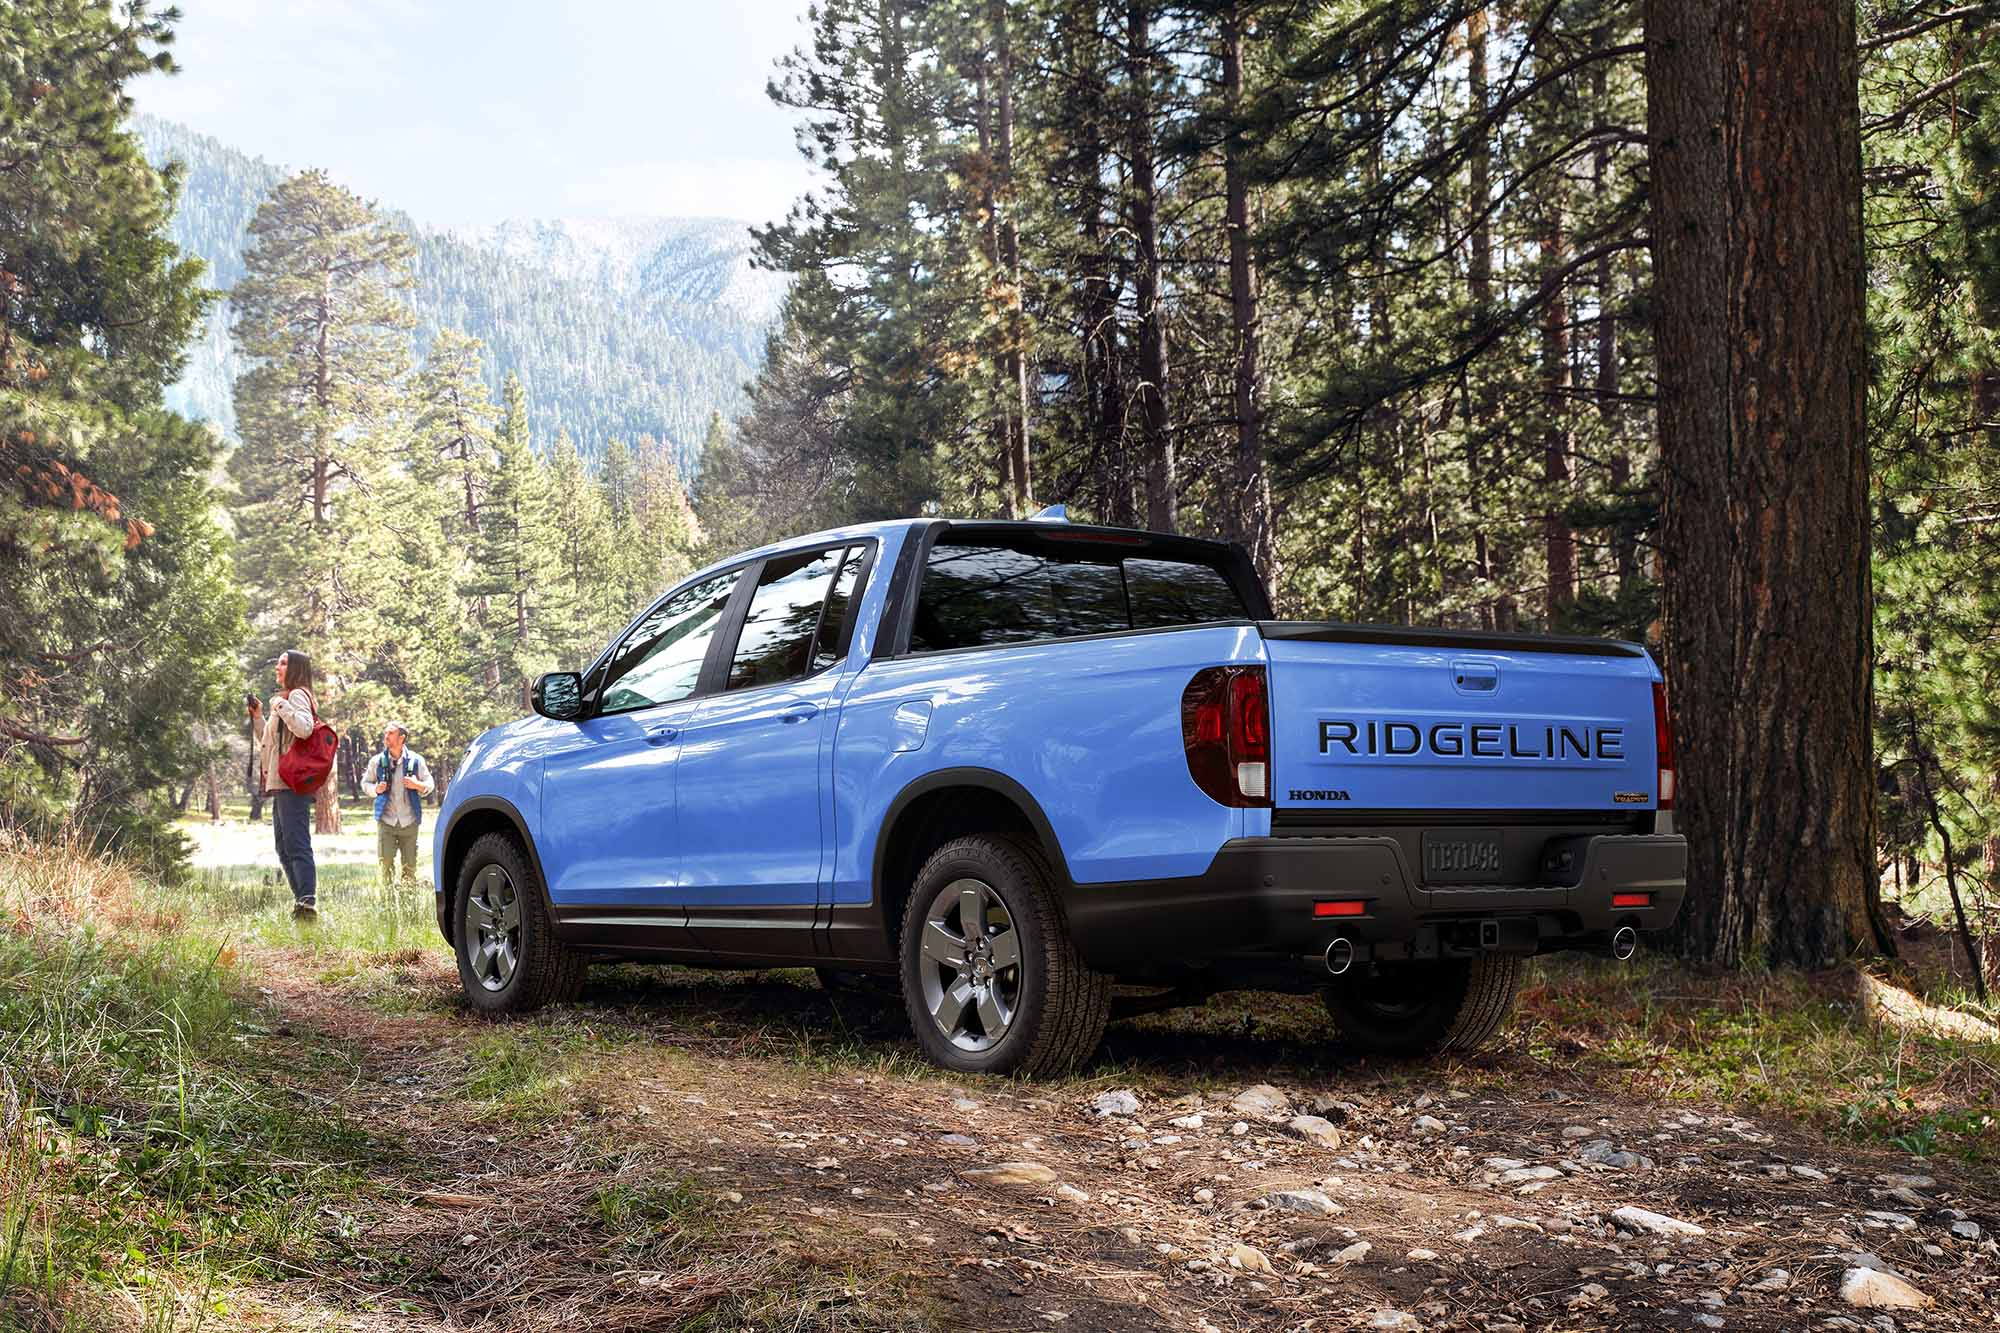 Blue Honda Ridgeline parked in forest with hikers standing nearby.